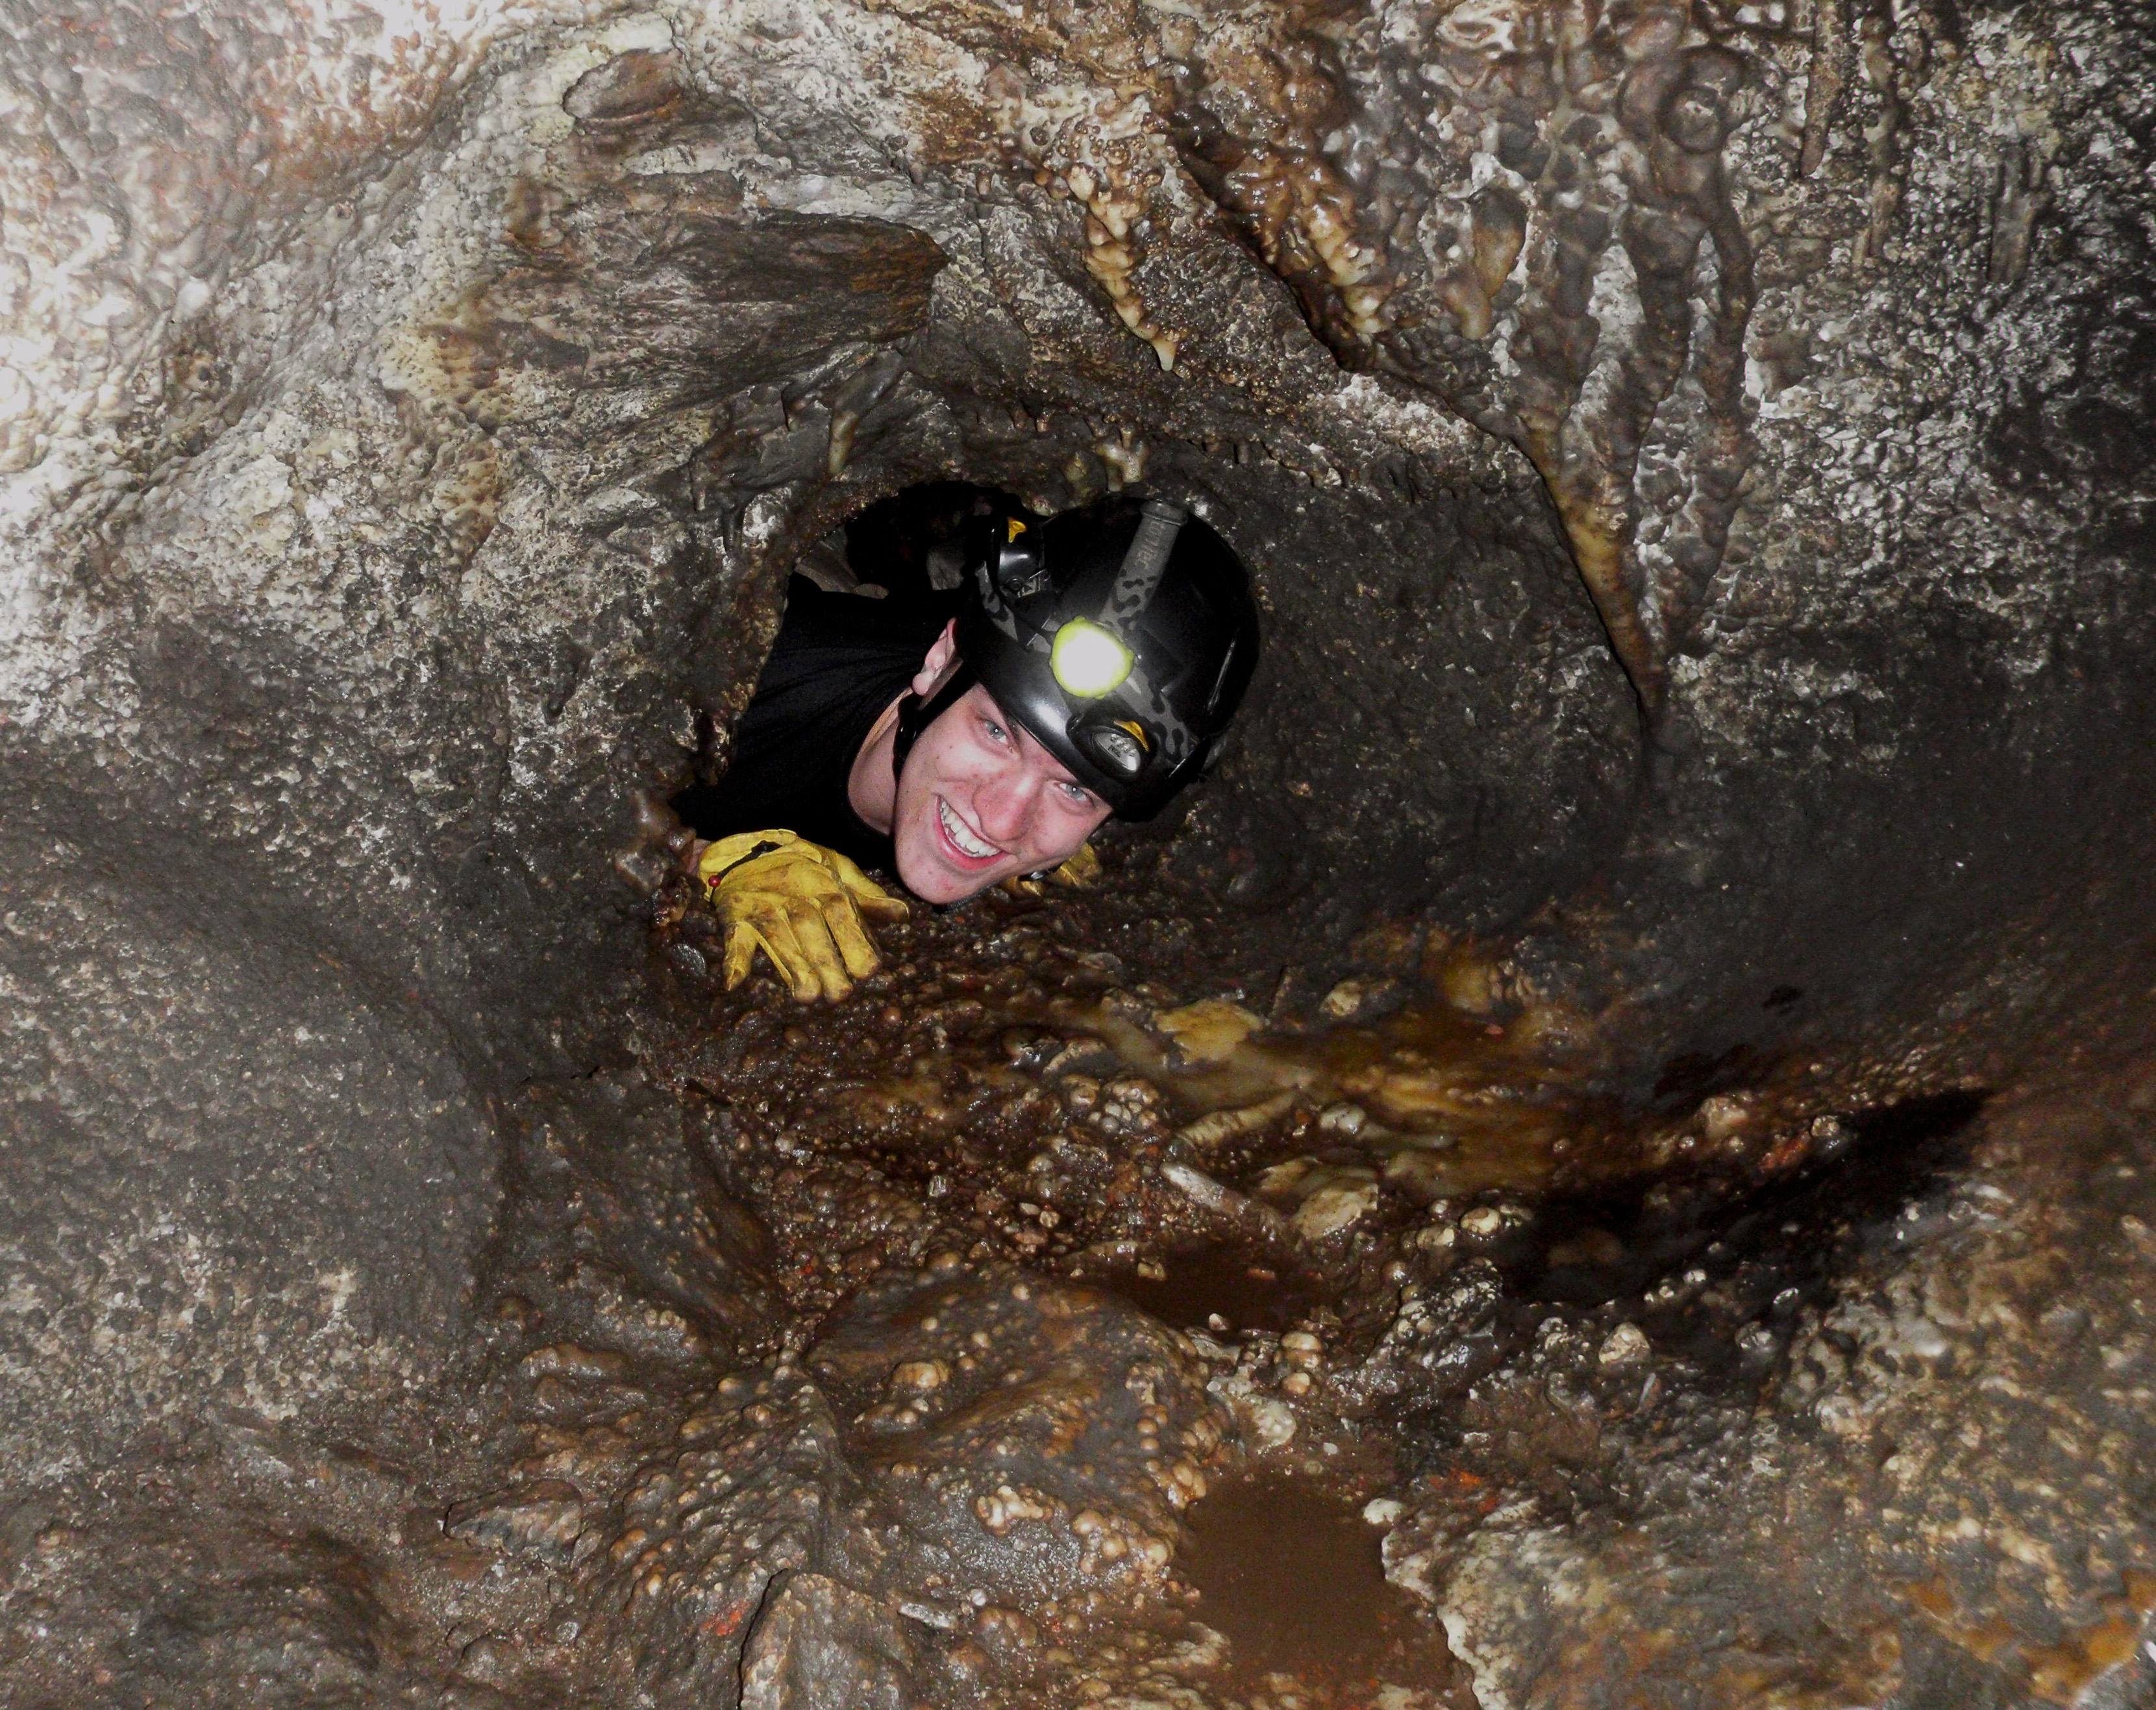 A caver squeezes through a very small and tight opening, surrounded by multi-colored rocks.